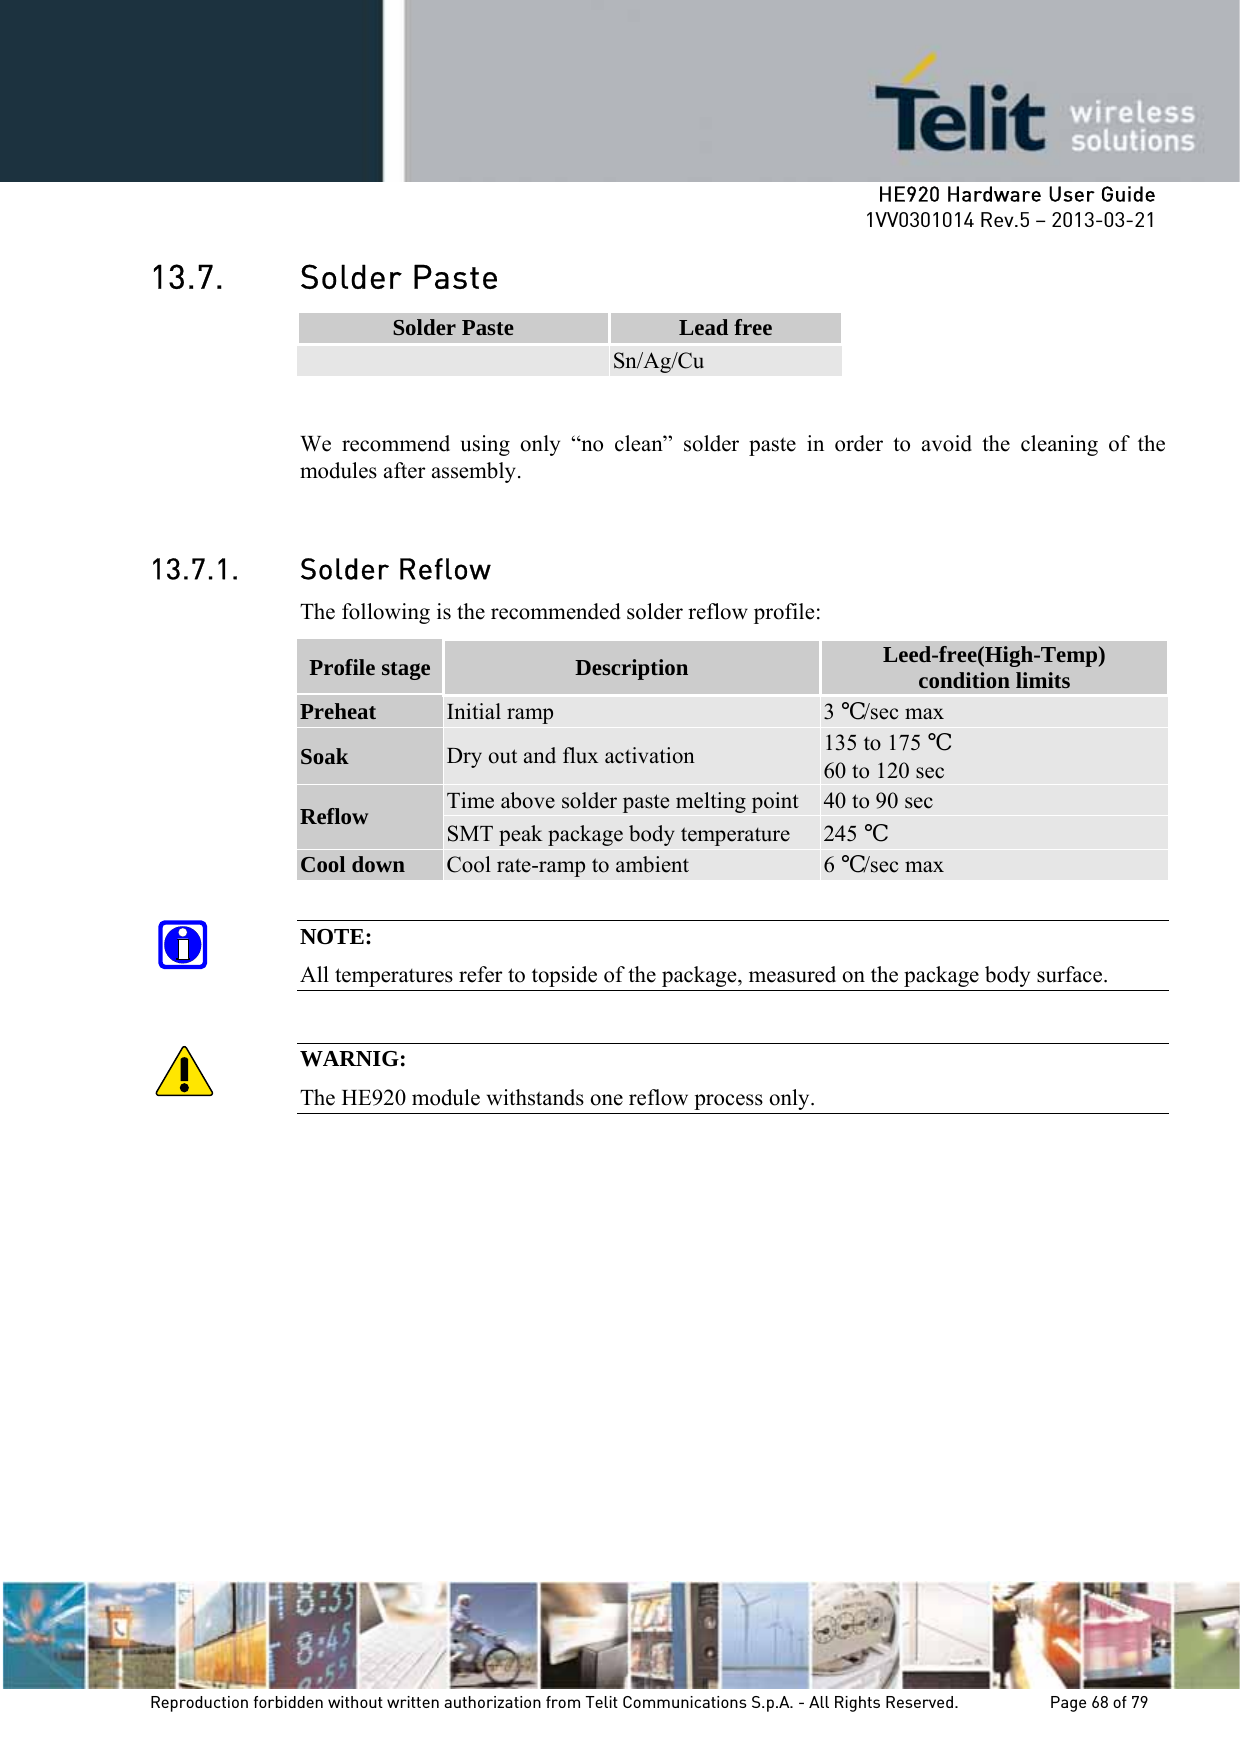     HE920 Hardware User Guide 1VV0301014 Rev.5 – 2013-03-21 Reproduction forbidden without written authorization from Telit Communications S.p.A. - All Rights Reserved.    Page 68 of 79  13.7. Solder Paste Solder Paste  Lead free  Sn/Ag/Cu  We recommend using only “no clean” solder paste in order to avoid the cleaning of the modules after assembly.  13.7.1. Solder Reflow The following is the recommended solder reflow profile: Profile stage  Description  Leed-free(High-Temp) condition limits Preheat Initial ramp  3 ℃/sec max Soak Dry out and flux activation  135 to 175 ℃ 60 to 120 sec Reflow Time above solder paste melting point  40 to 90 sec SMT peak package body temperature  245 ℃ Cool down Cool rate-ramp to ambient  6 ℃/sec max  NOTE: All temperatures refer to topside of the package, measured on the package body surface.  WARNIG: The HE920 module withstands one reflow process only. 